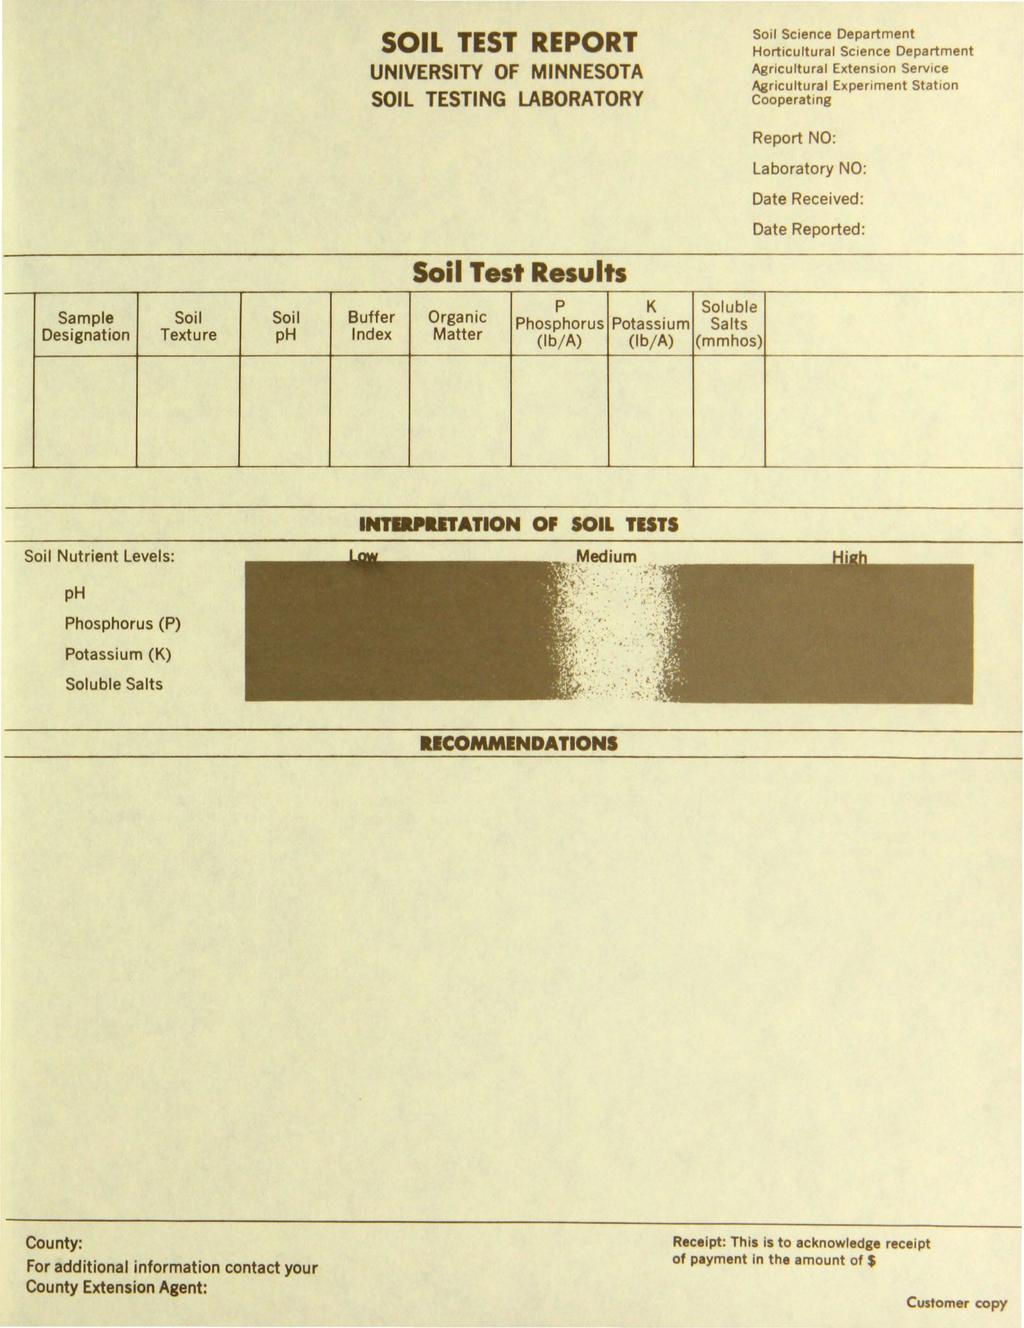 SOIL TEST REPORT UNIVERSITY OF MINNESOTA SOIL TESTING LABORATORY Soil Science Department Horticultural Science Department Agricultural Extension Service Agricultural Experiment Station Cooperating